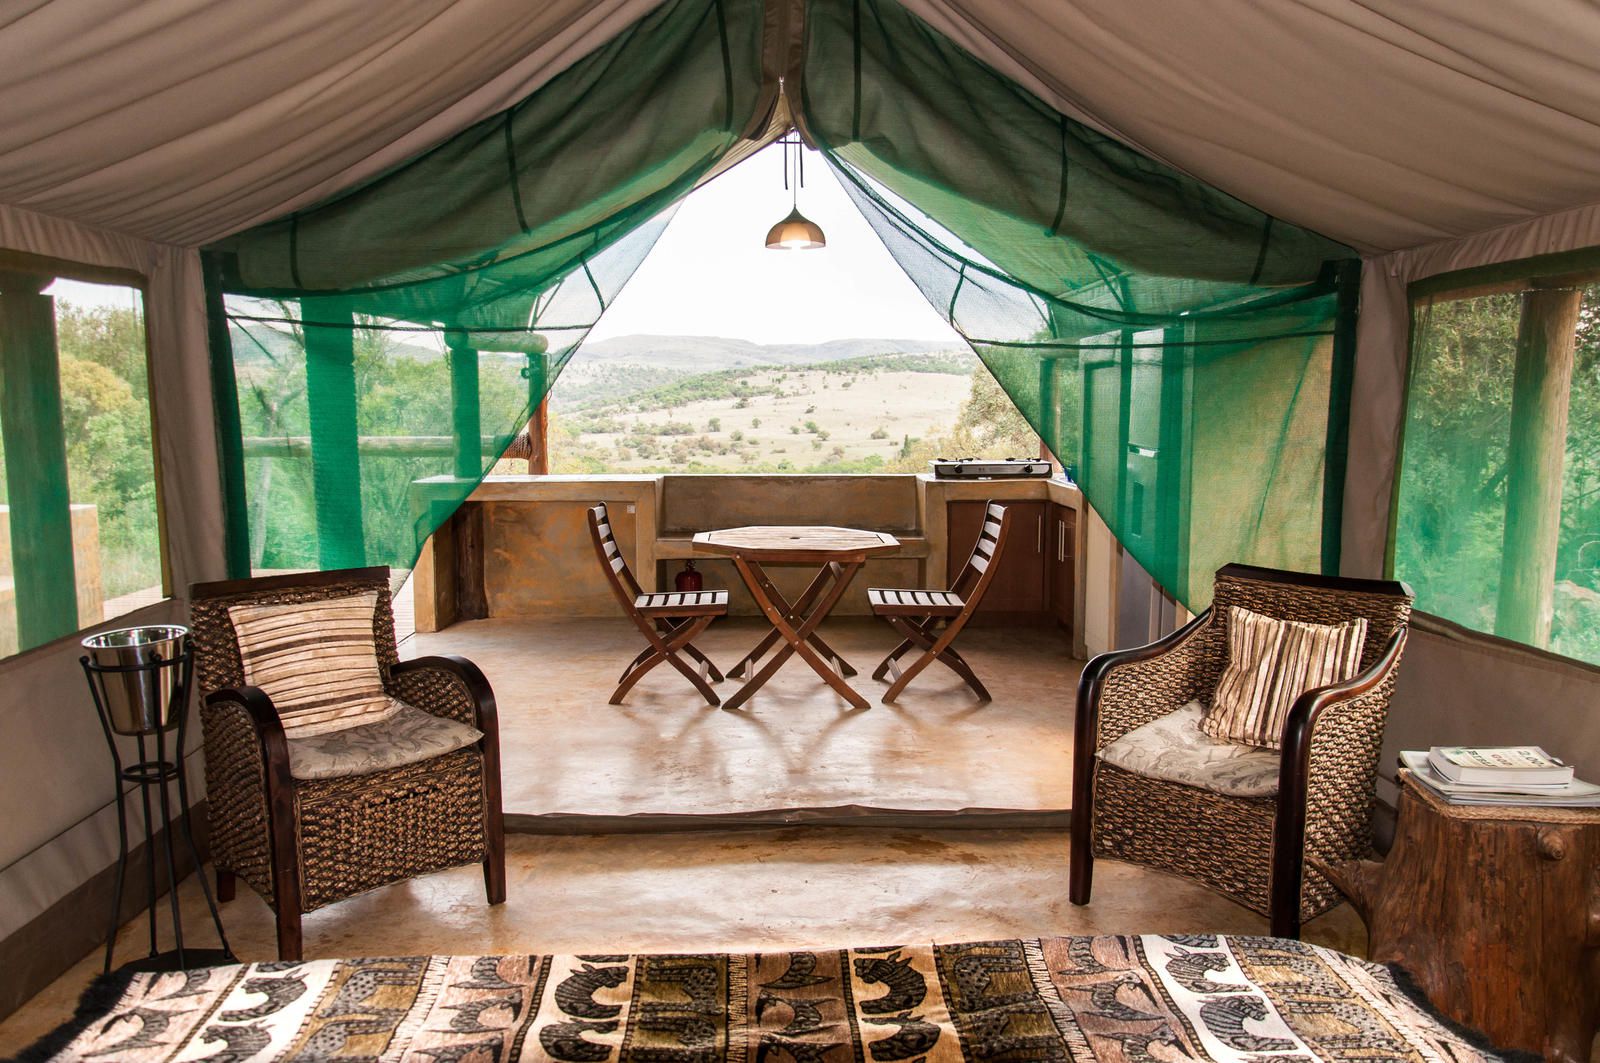 B Sorah Luxury Tented Camp Skeerpoort Hartbeespoort North West Province South Africa Tent, Architecture